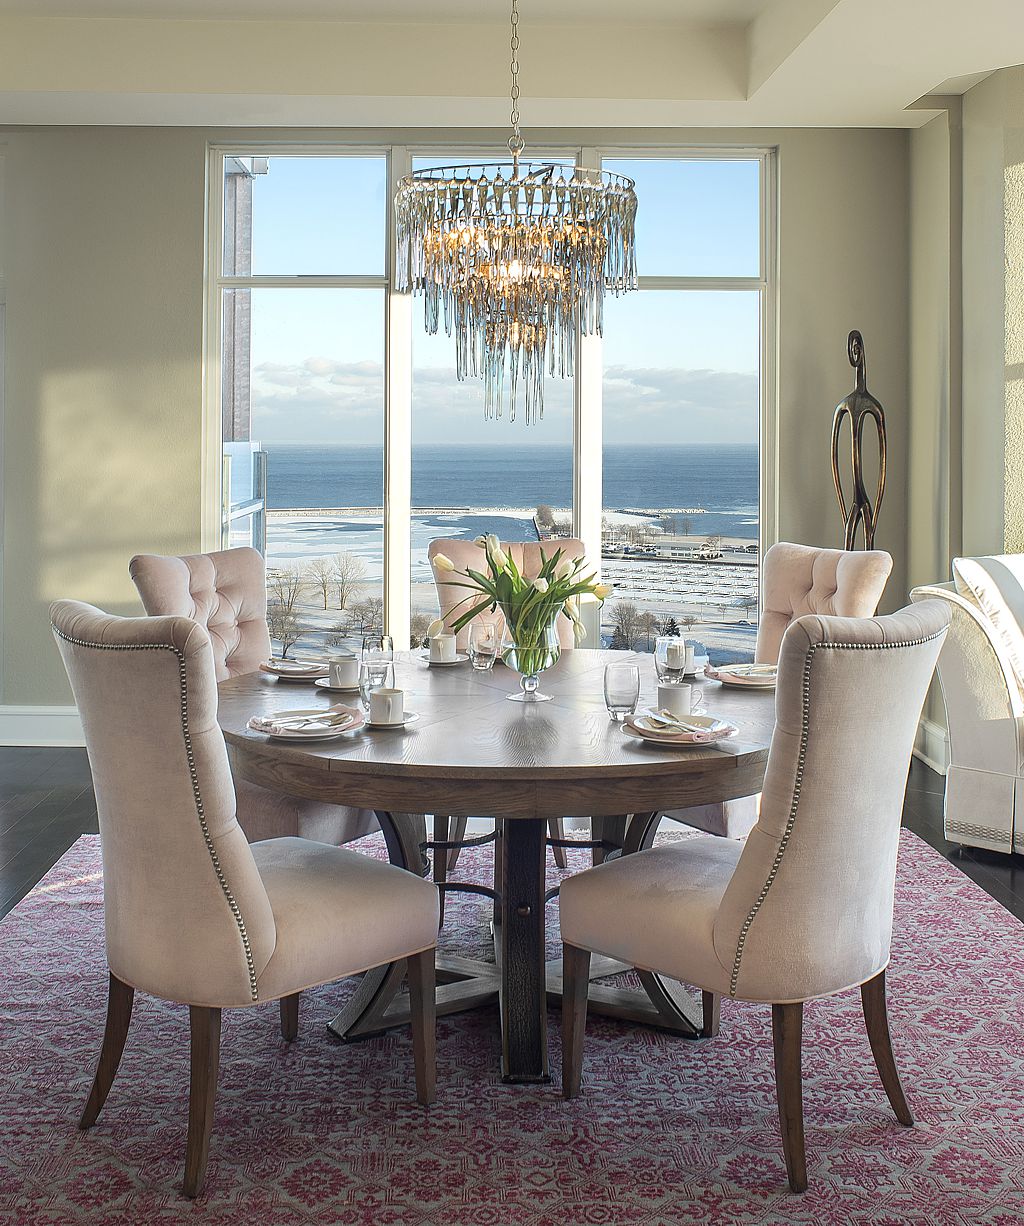 Pastel pink velvet chairs soften the brighter pink rug in this coastal dining room.